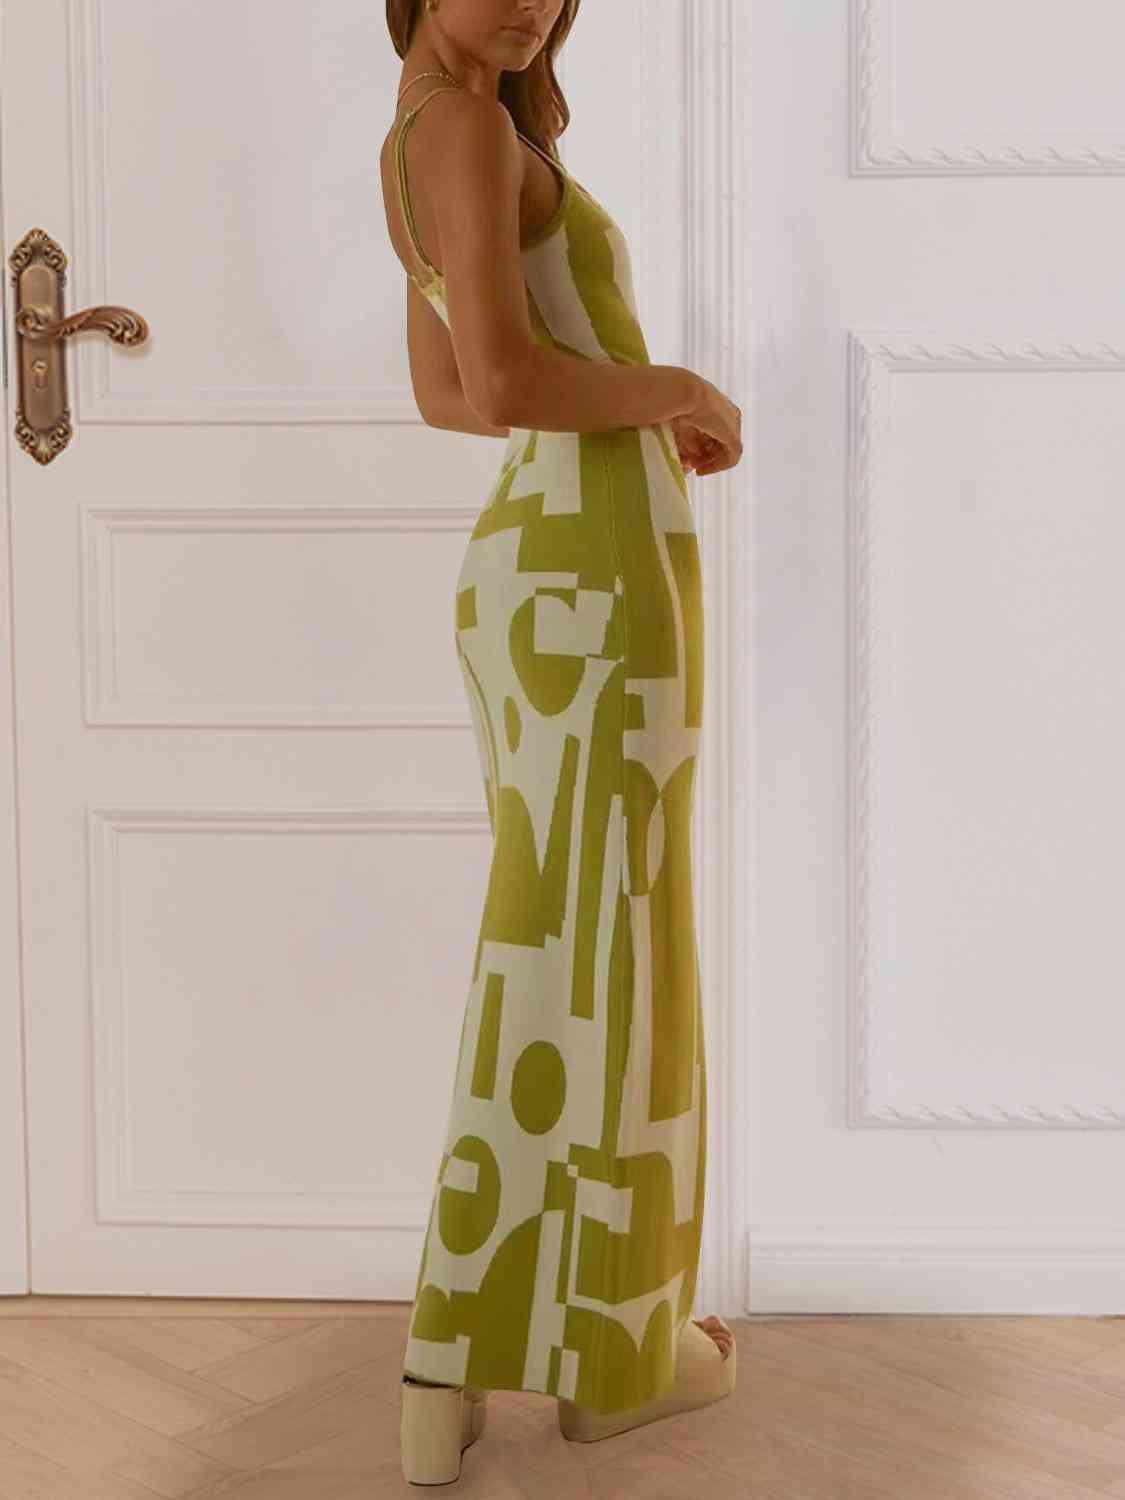 a woman standing in front of a door wearing a green and white dress